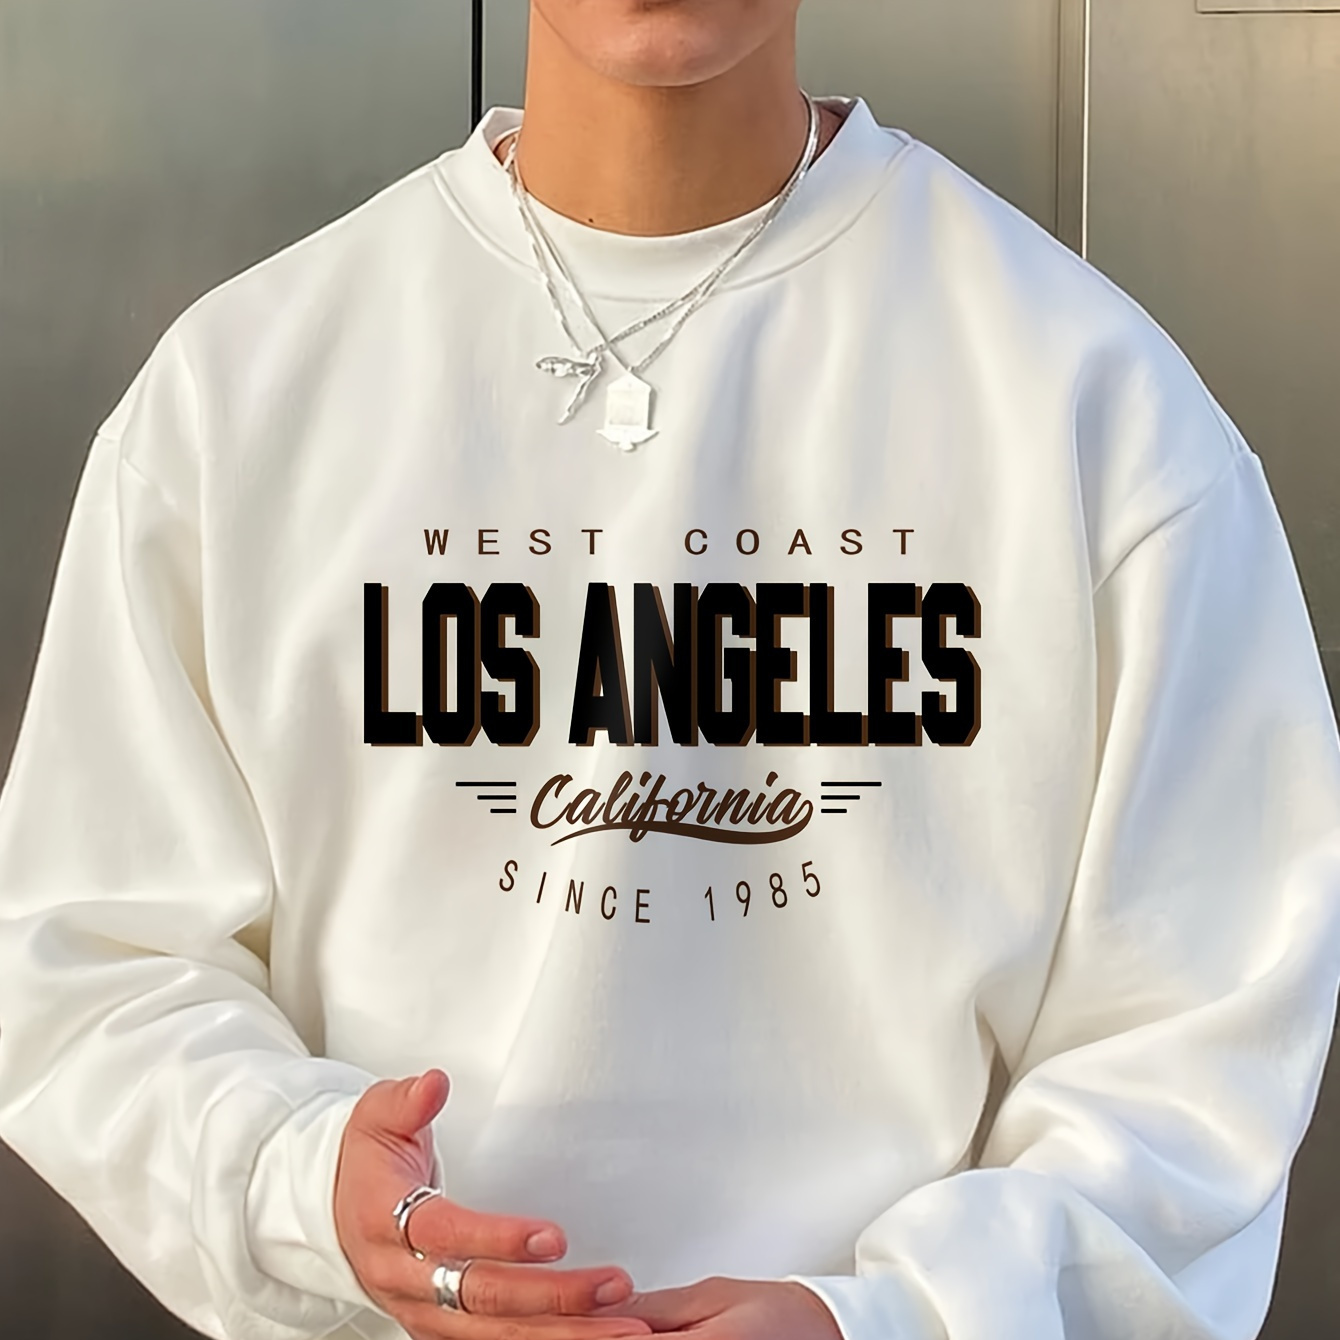 

Los Angeles, California Print Men's Fashionable Printed Long Sleeve Sweatshirt - Comfortable Crew Neck, Ideal For Outdoor Sports, All-season Style